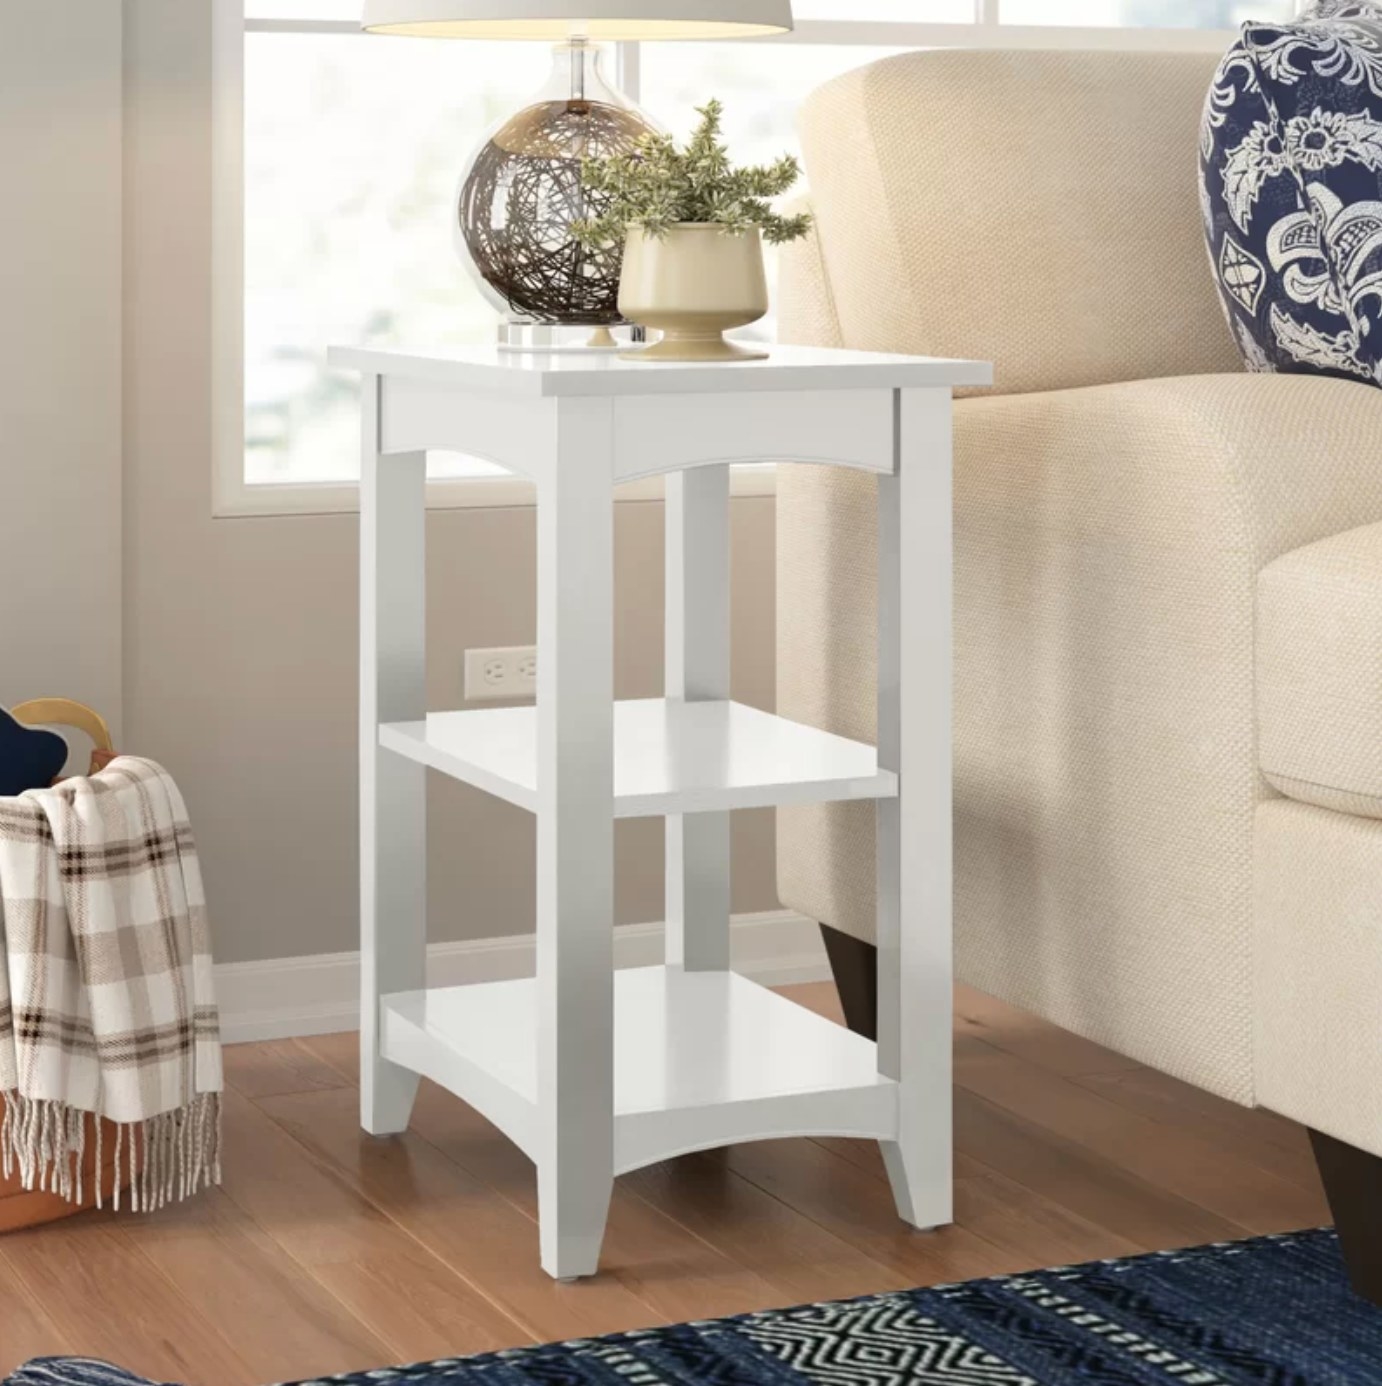 The end table with storage in white